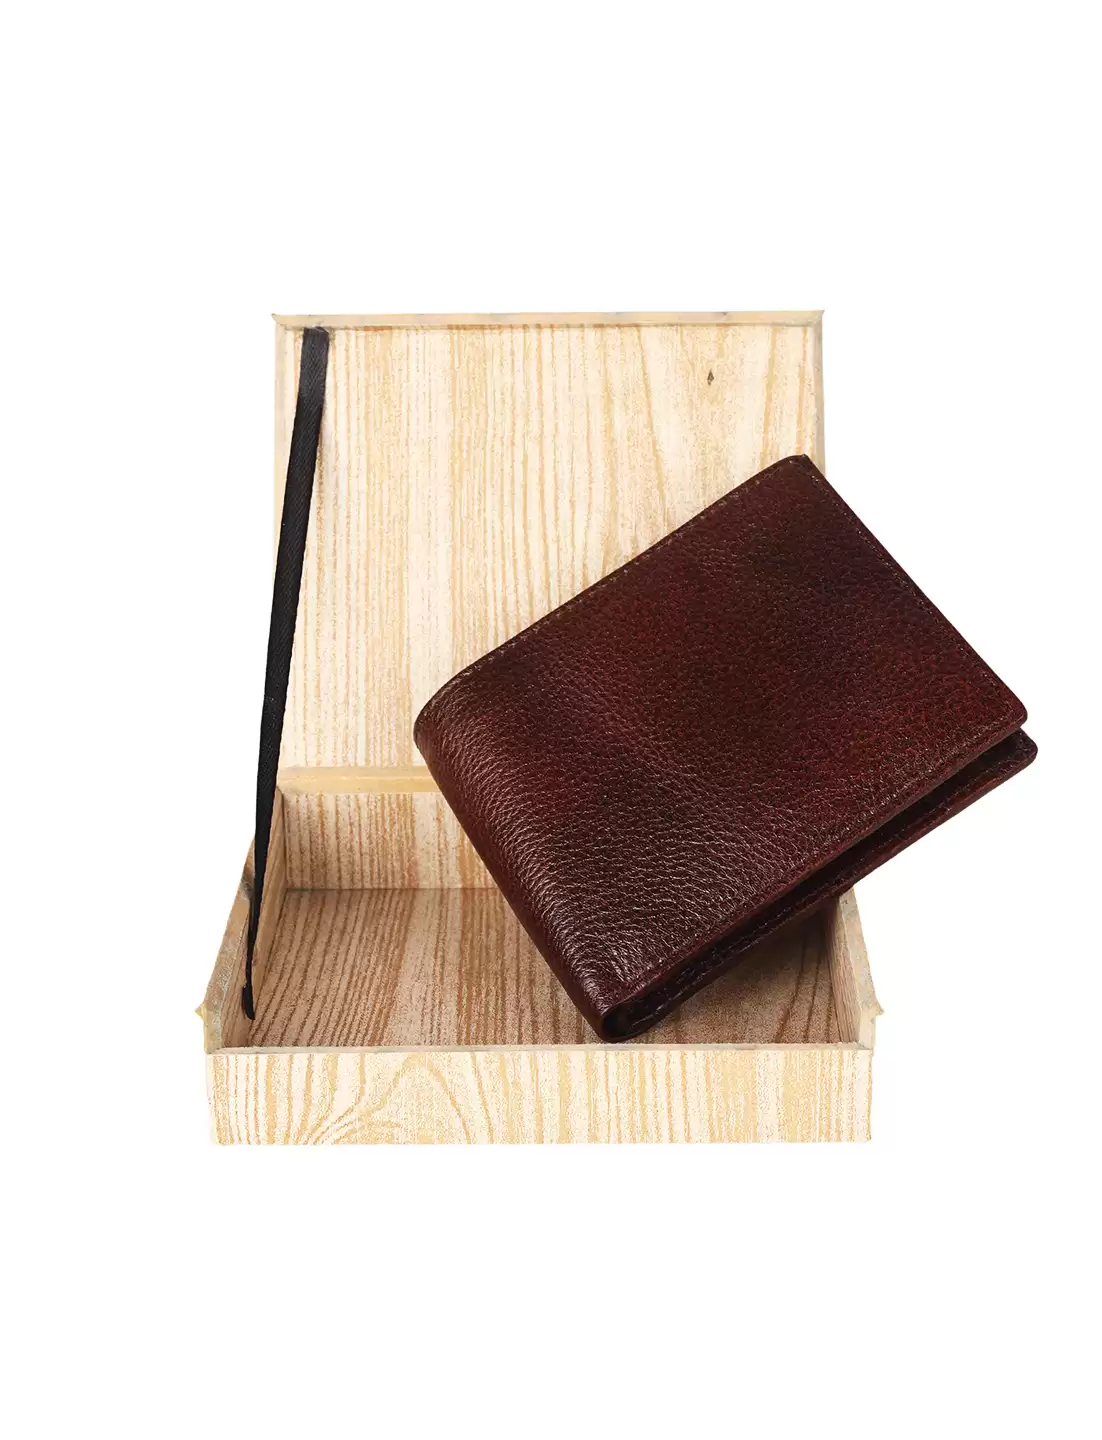 Gents Leather Wallet Titan - Get Best Price from Manufacturers & Suppliers  in India